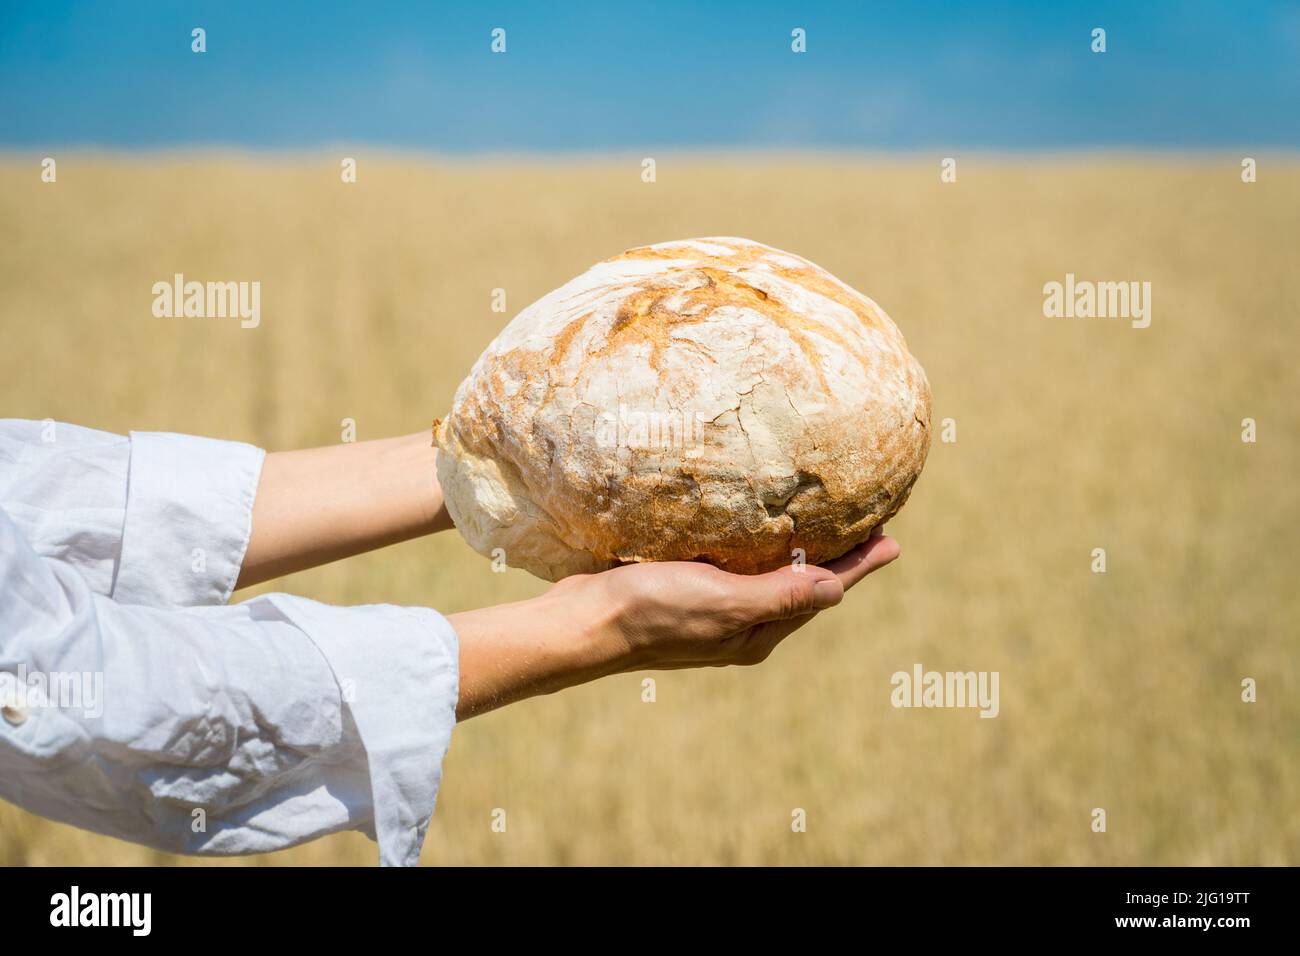 Female hands holding home baked bread loaf above ripe wheat field. World food security concept. Stock Photo